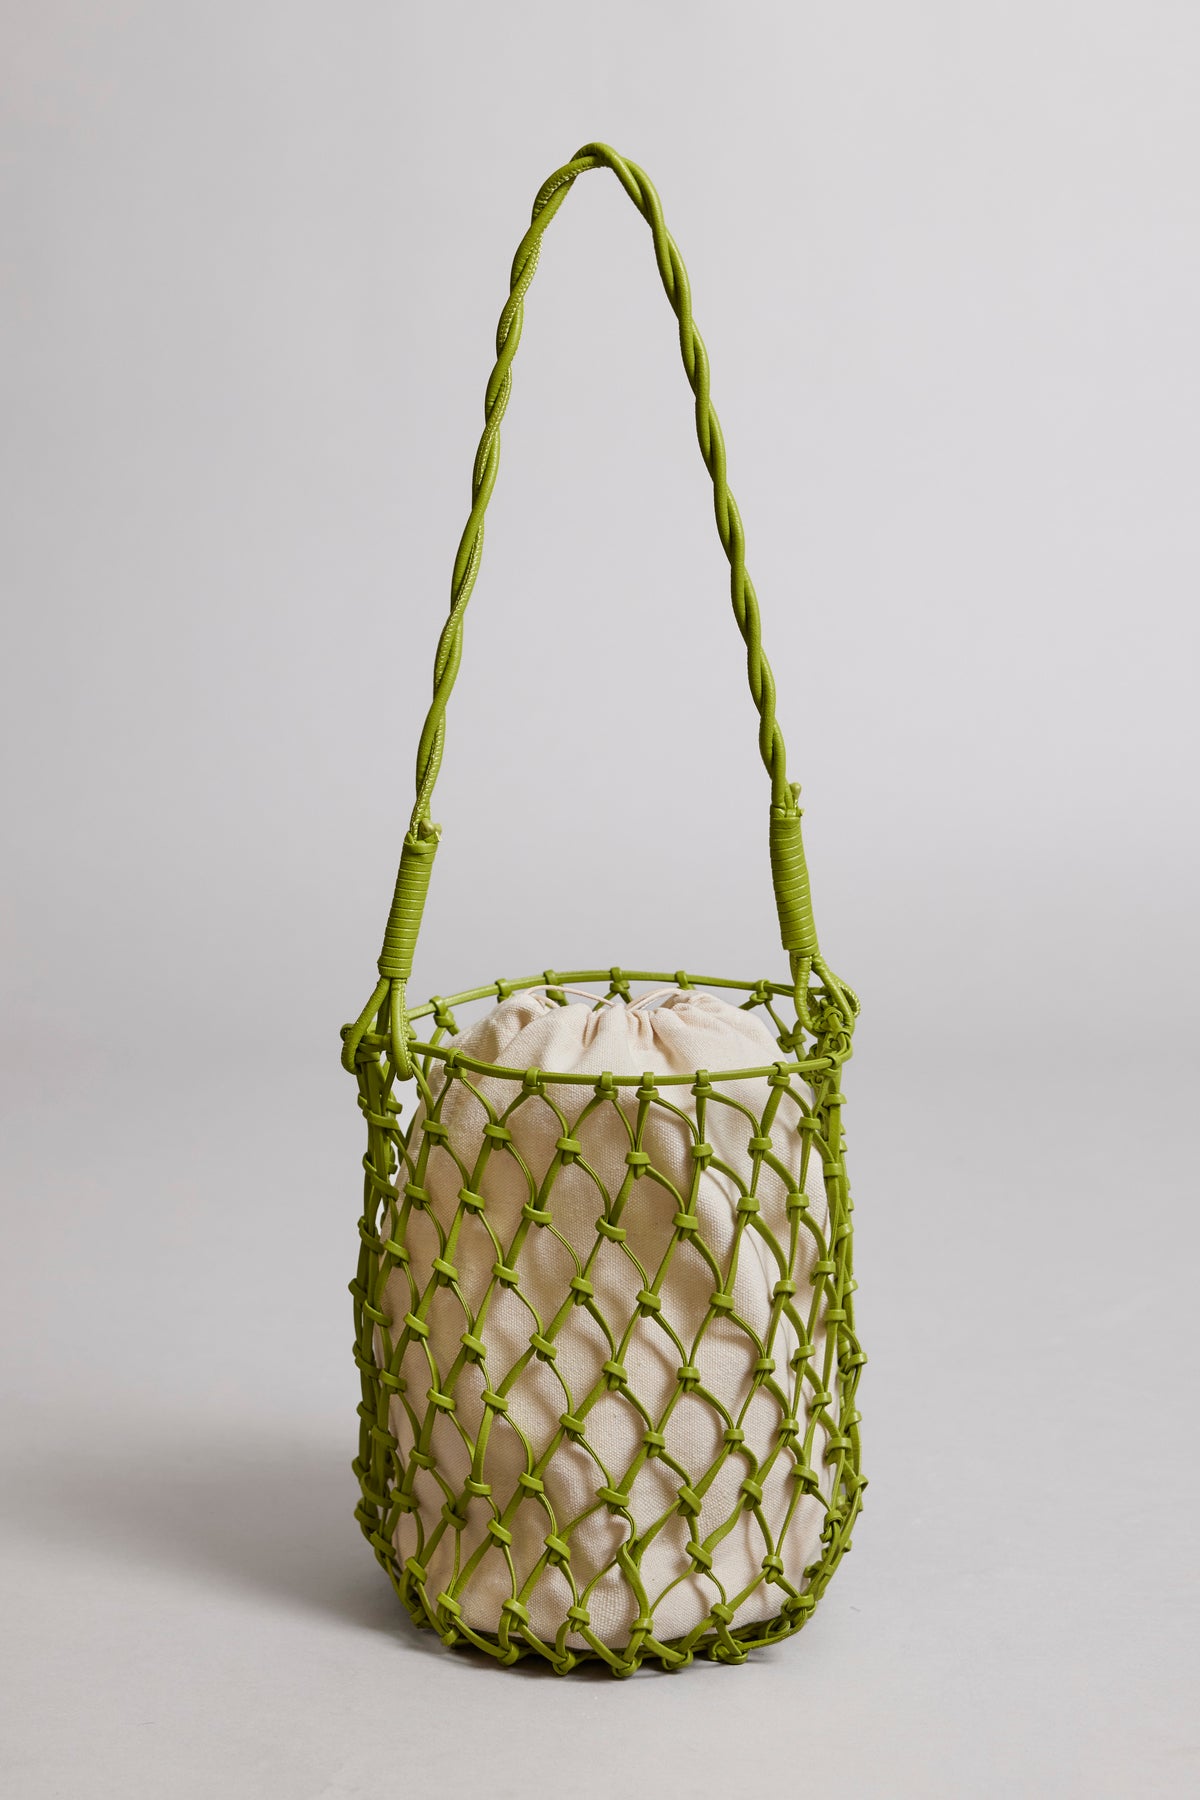 A lime green Velvet by Graham & Spencer mesh-designed tote bag with a braided strap and a light beige drawstring pouch inside, set against a neutral background.-36280402247873